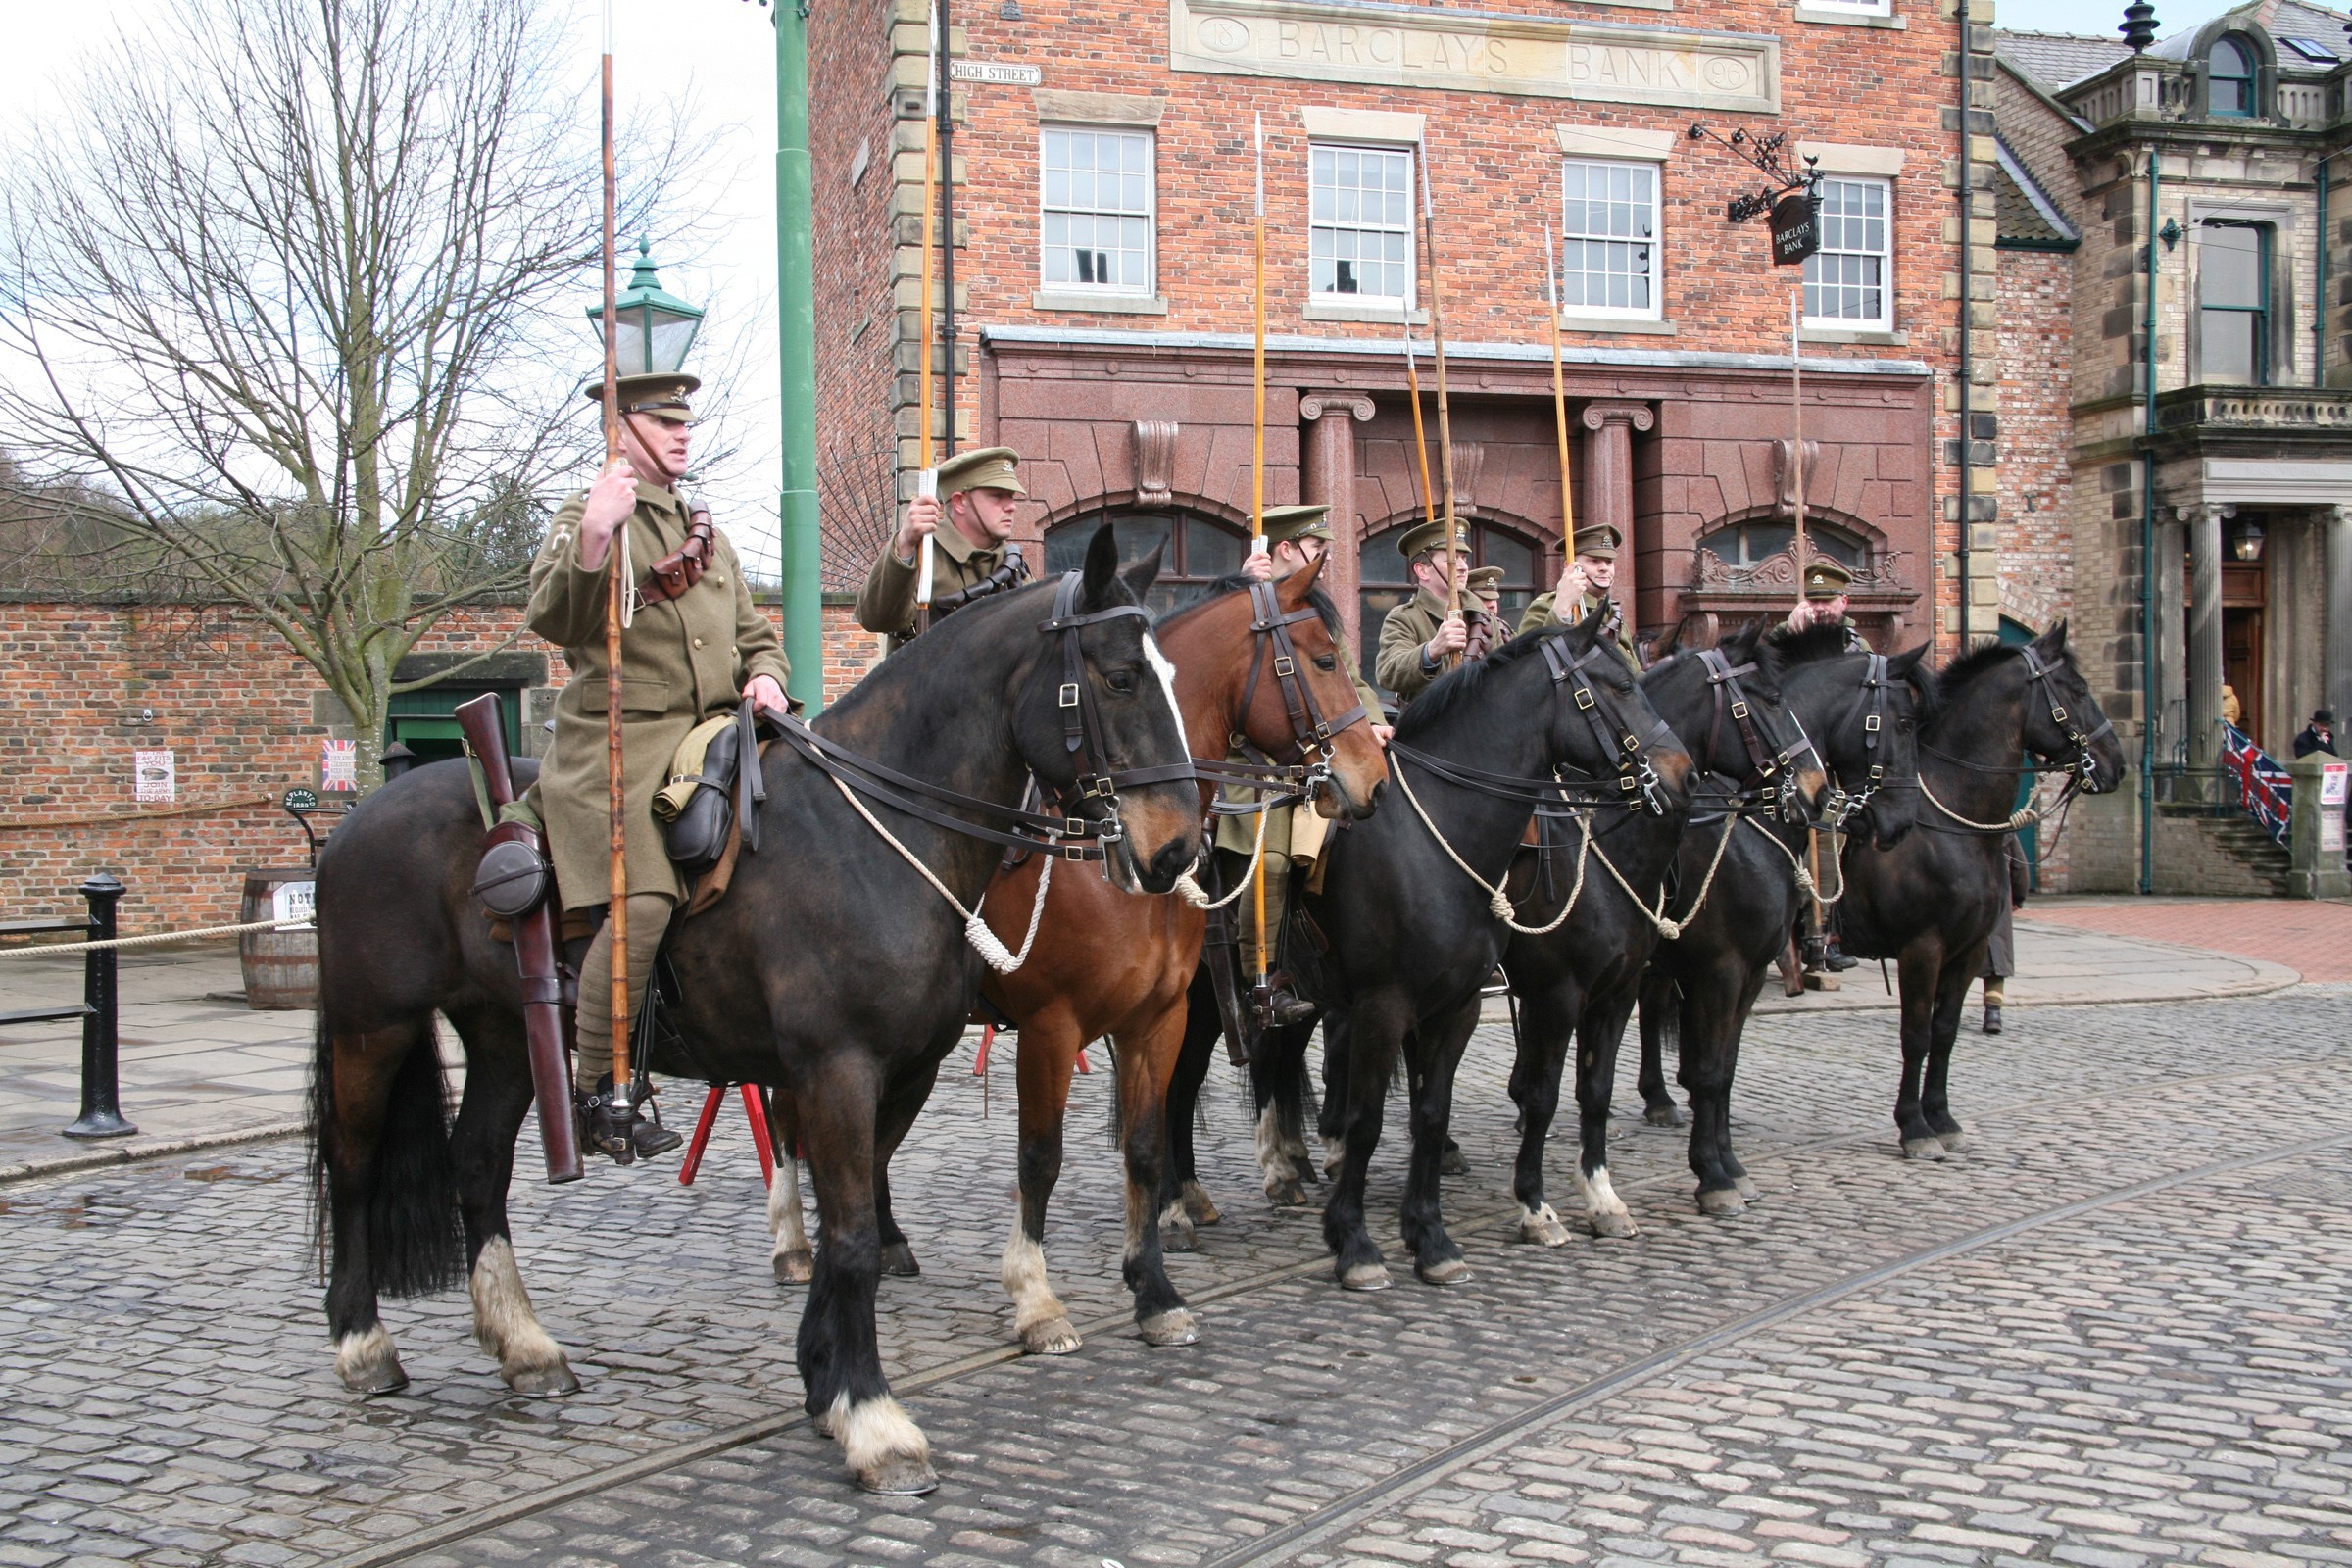 Beamish Museum to commemorate the centenary of the Battle of the Somme